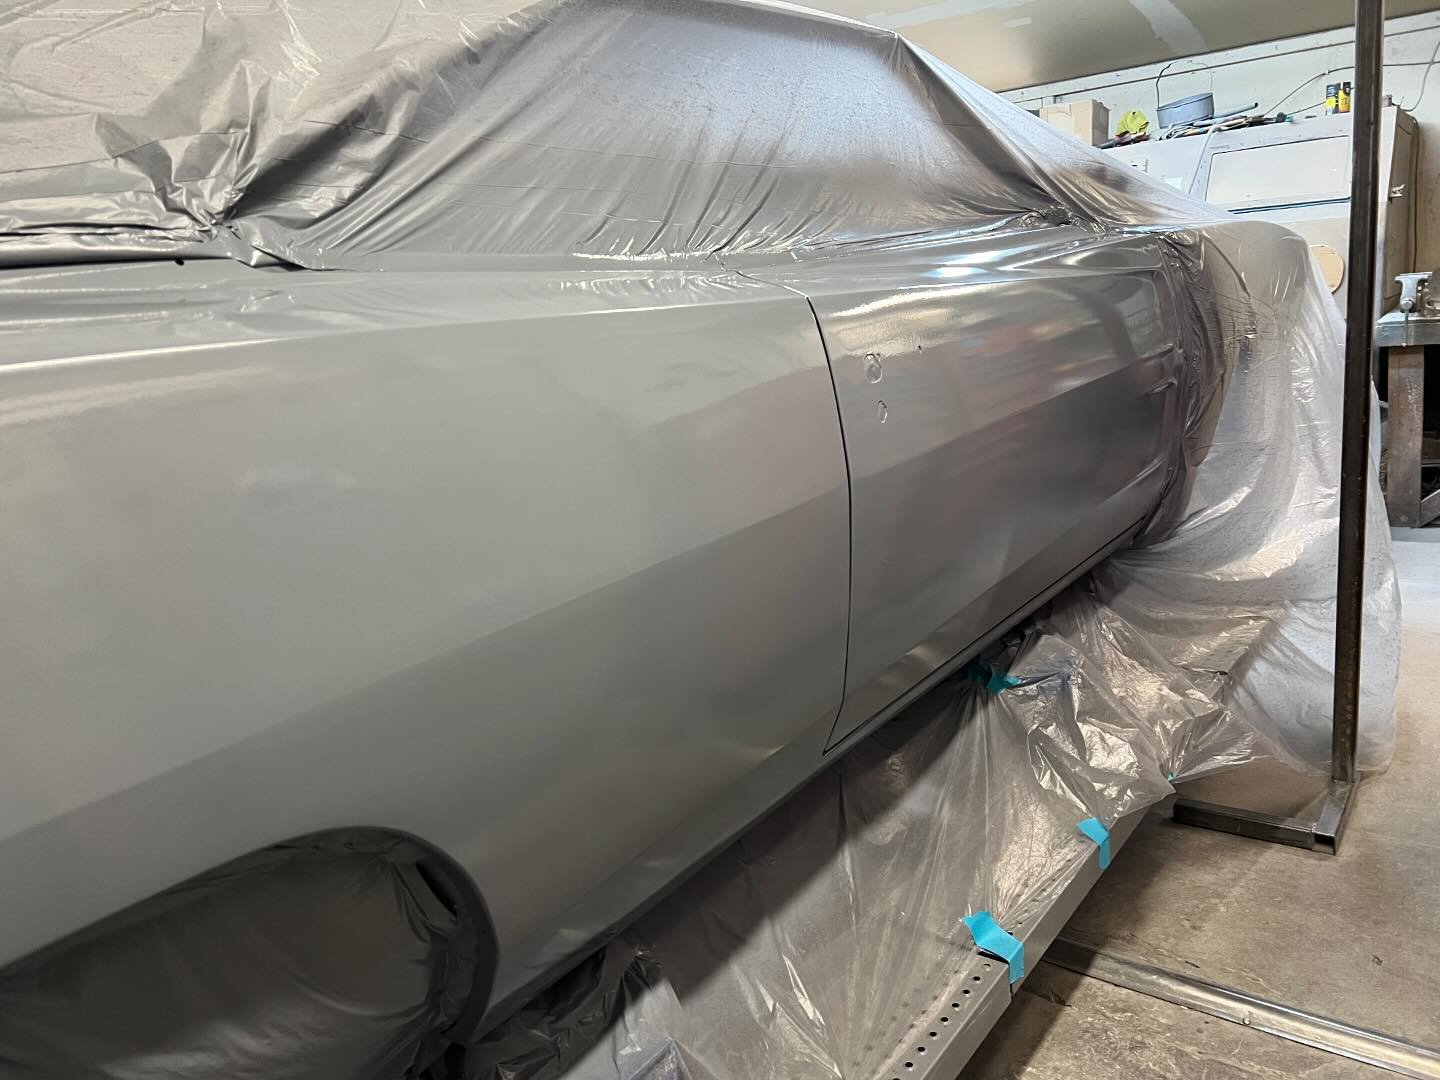 1968 Dodge Charger RT right door, right rear Quarter, tail panel with lower valance, upper body panel below rear glass bodywork done and high build primer #longvalleyautobody #akzonobelrefinish #colorbuild #1968dodgechargerrt